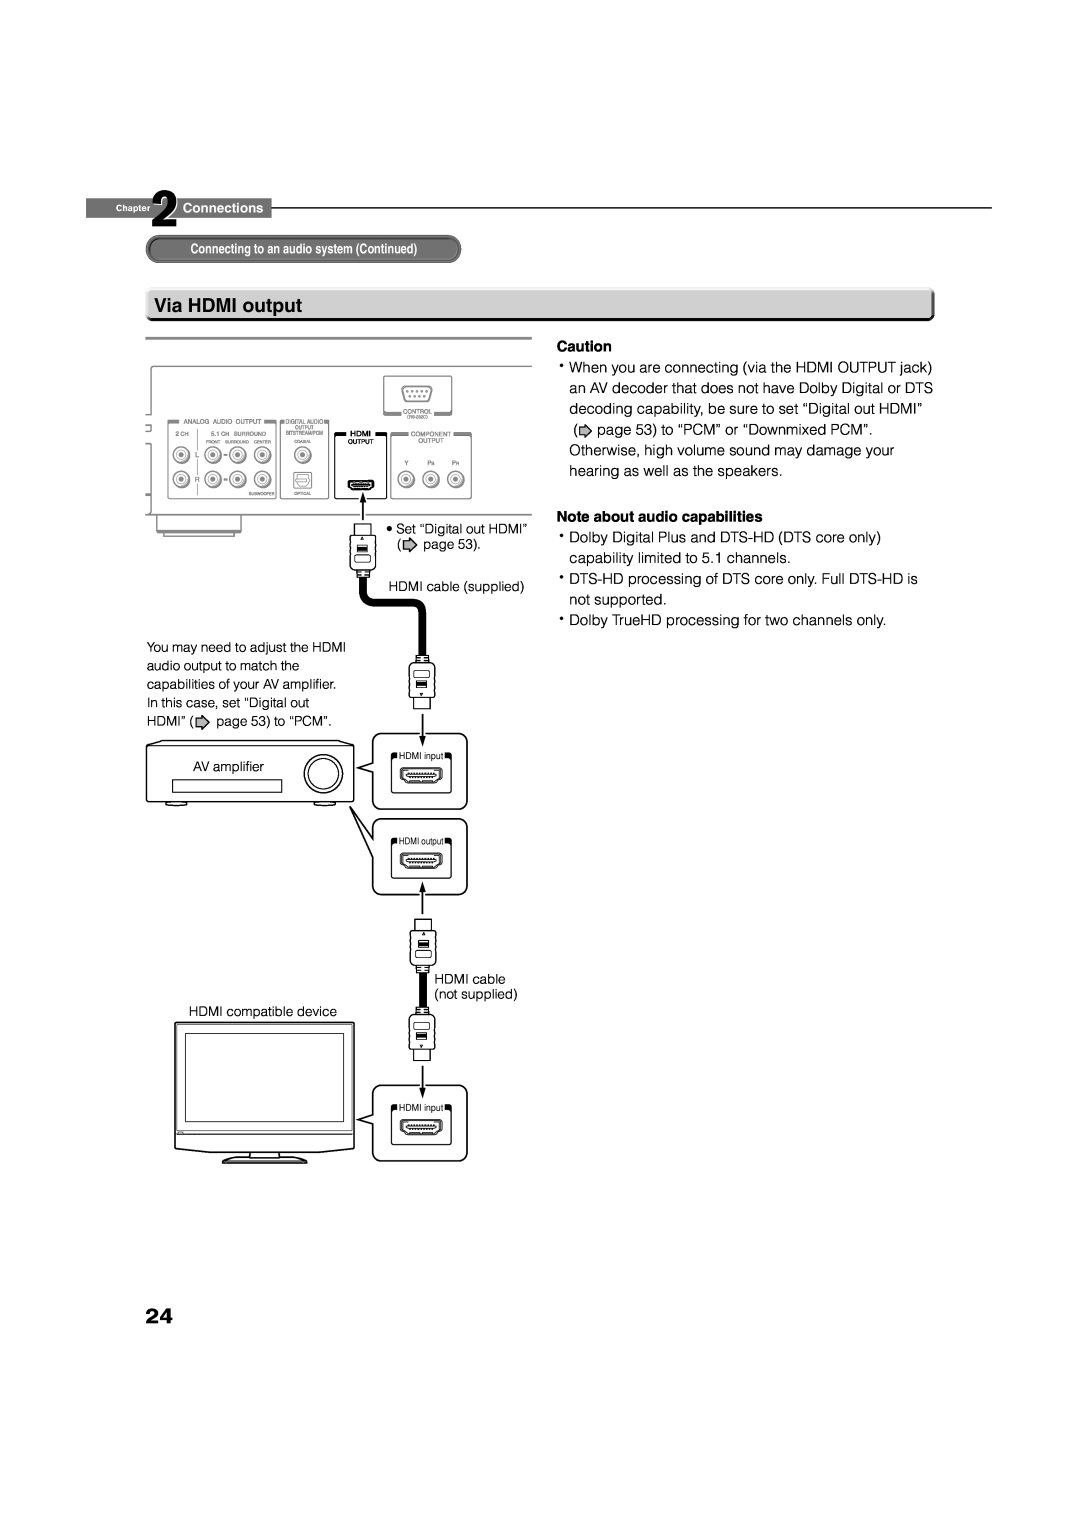 Toshiba HD-D1, HD-A1 owner manual Via HDMI output, Note about audio capabilities 